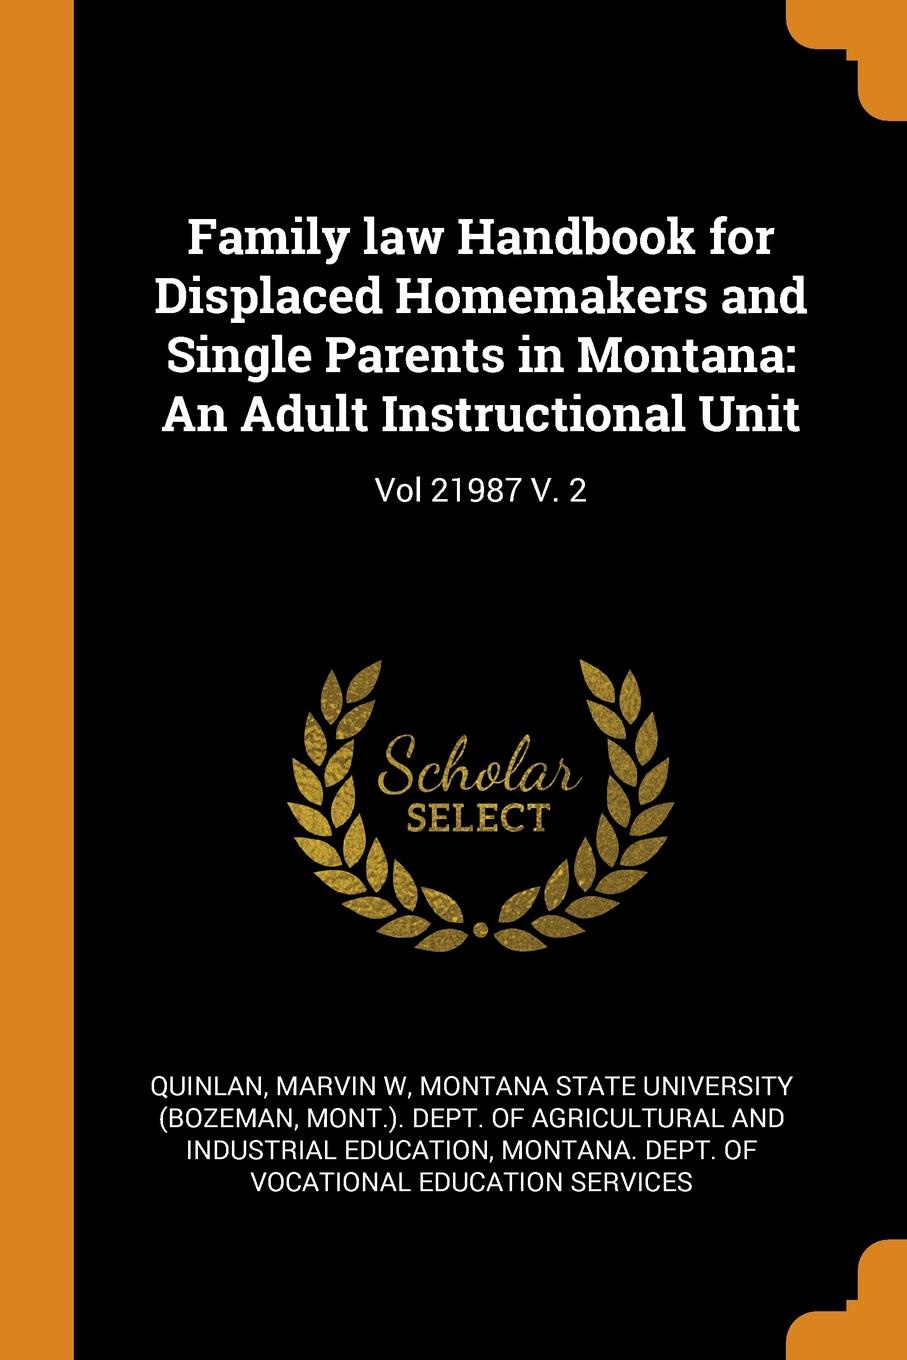 Family law Handbook for Displaced Homemakers and Single Parents in Montana. An Adult Instructional Unit: Vol 21987 V. 2